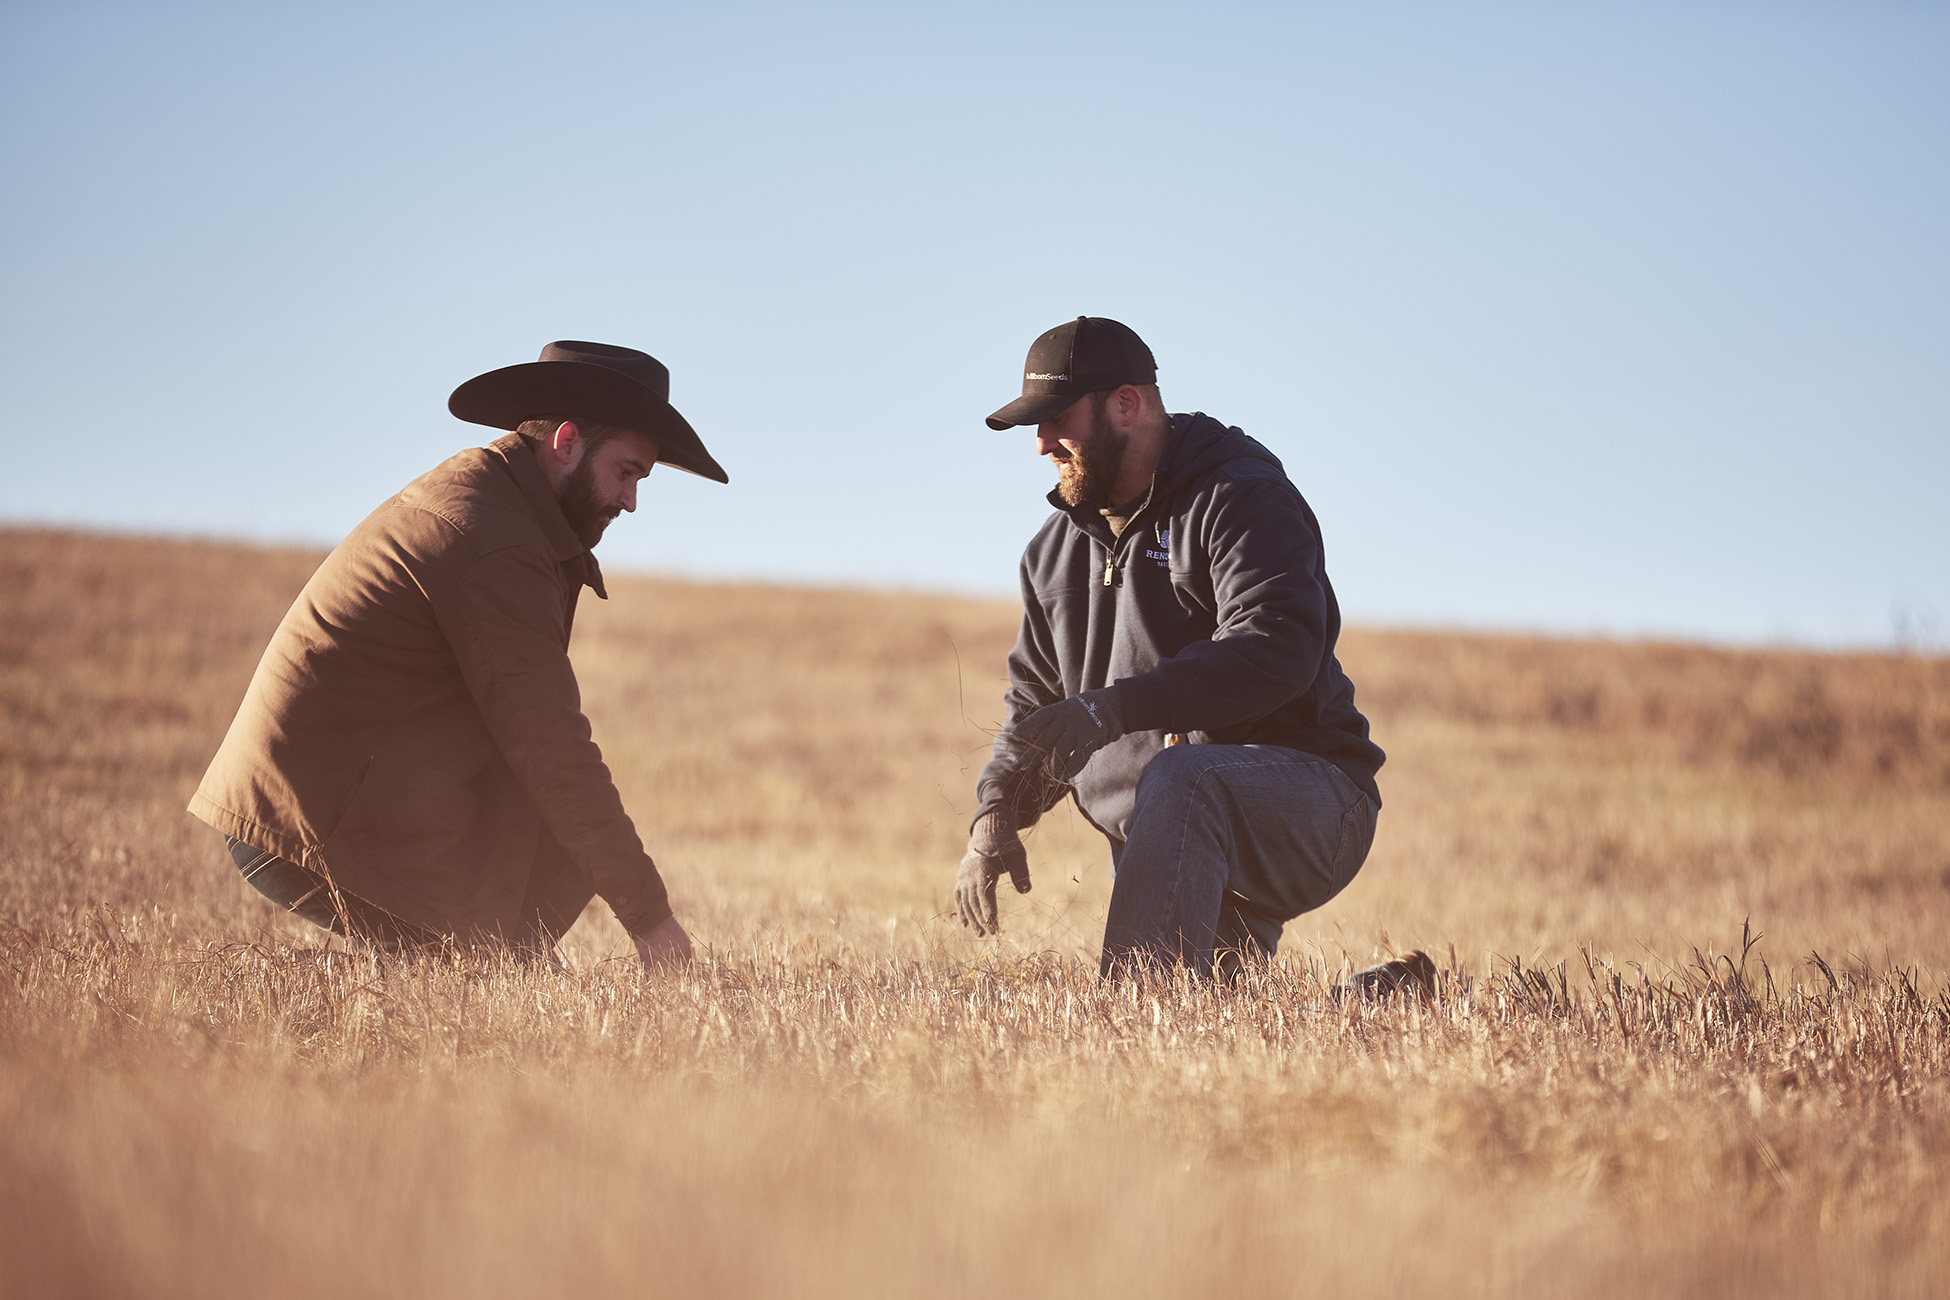 AgSpire advisor works with a rancher to analyze his pasture and plan for improvements.